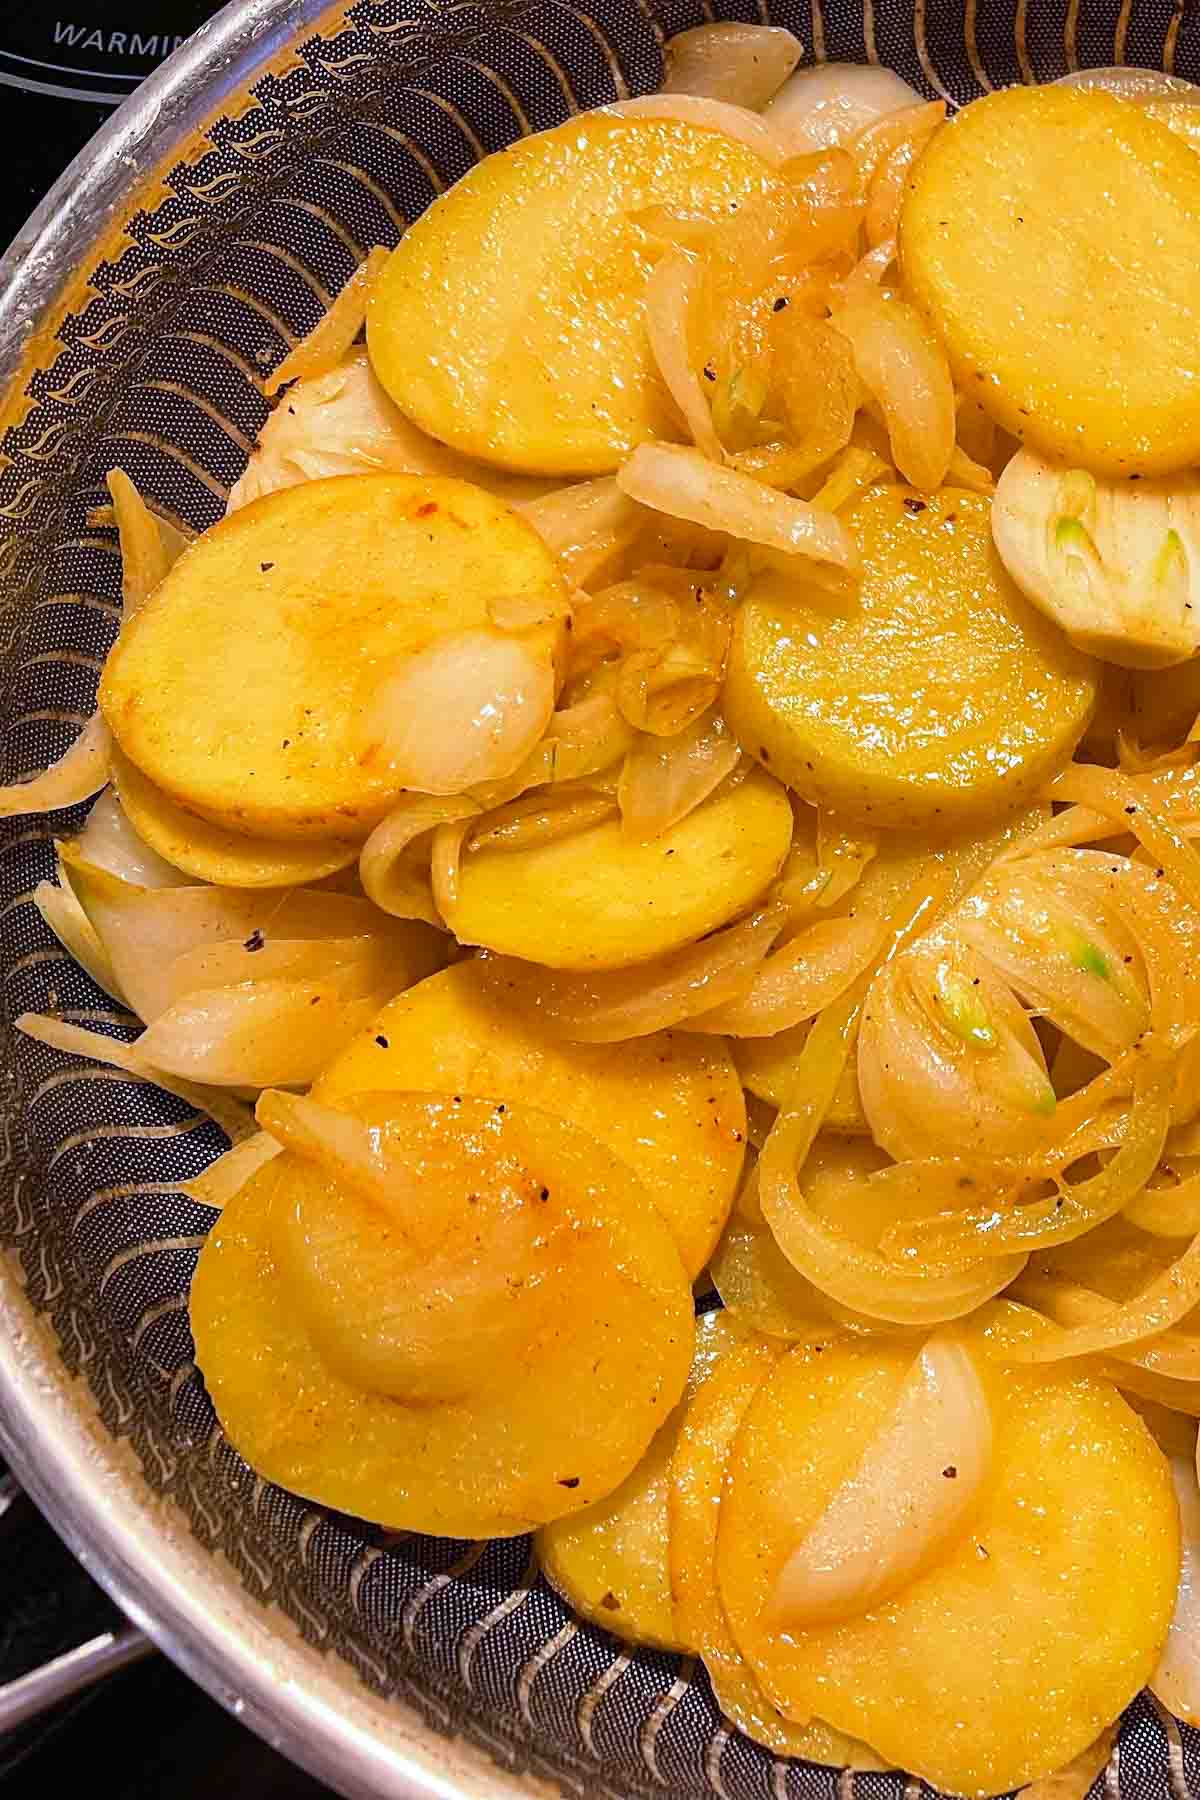 Fried potatoes and onions in a skillet after cooking